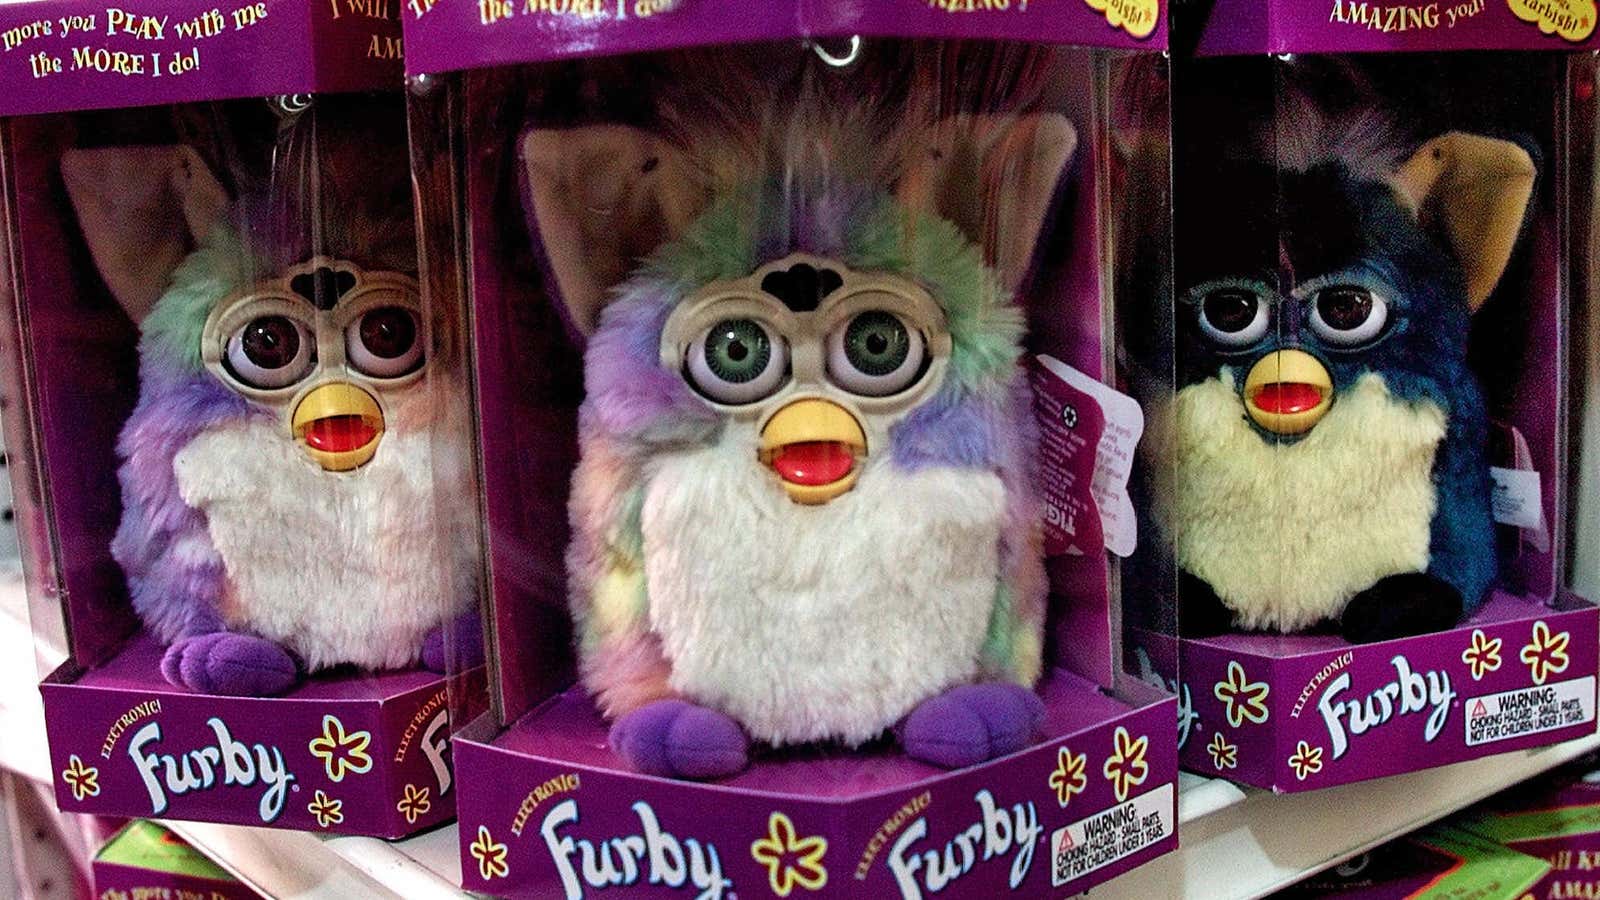 Is Google trying to bring back the Furby?